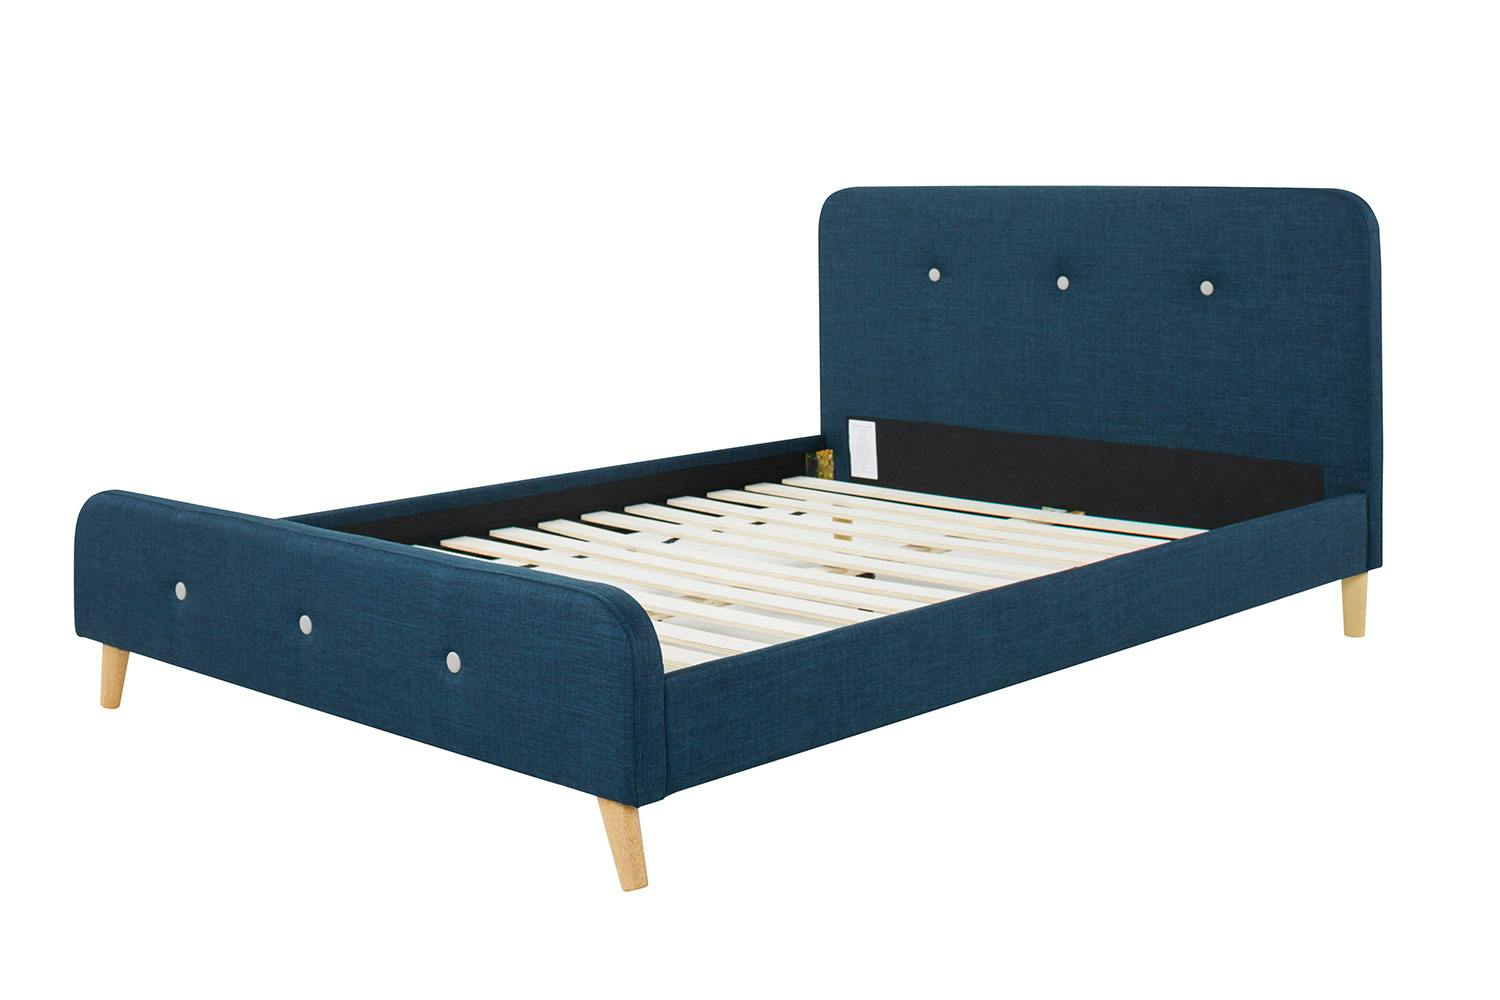 Calypso Queen Bed Frame by Nero Furniture - Navy Blue